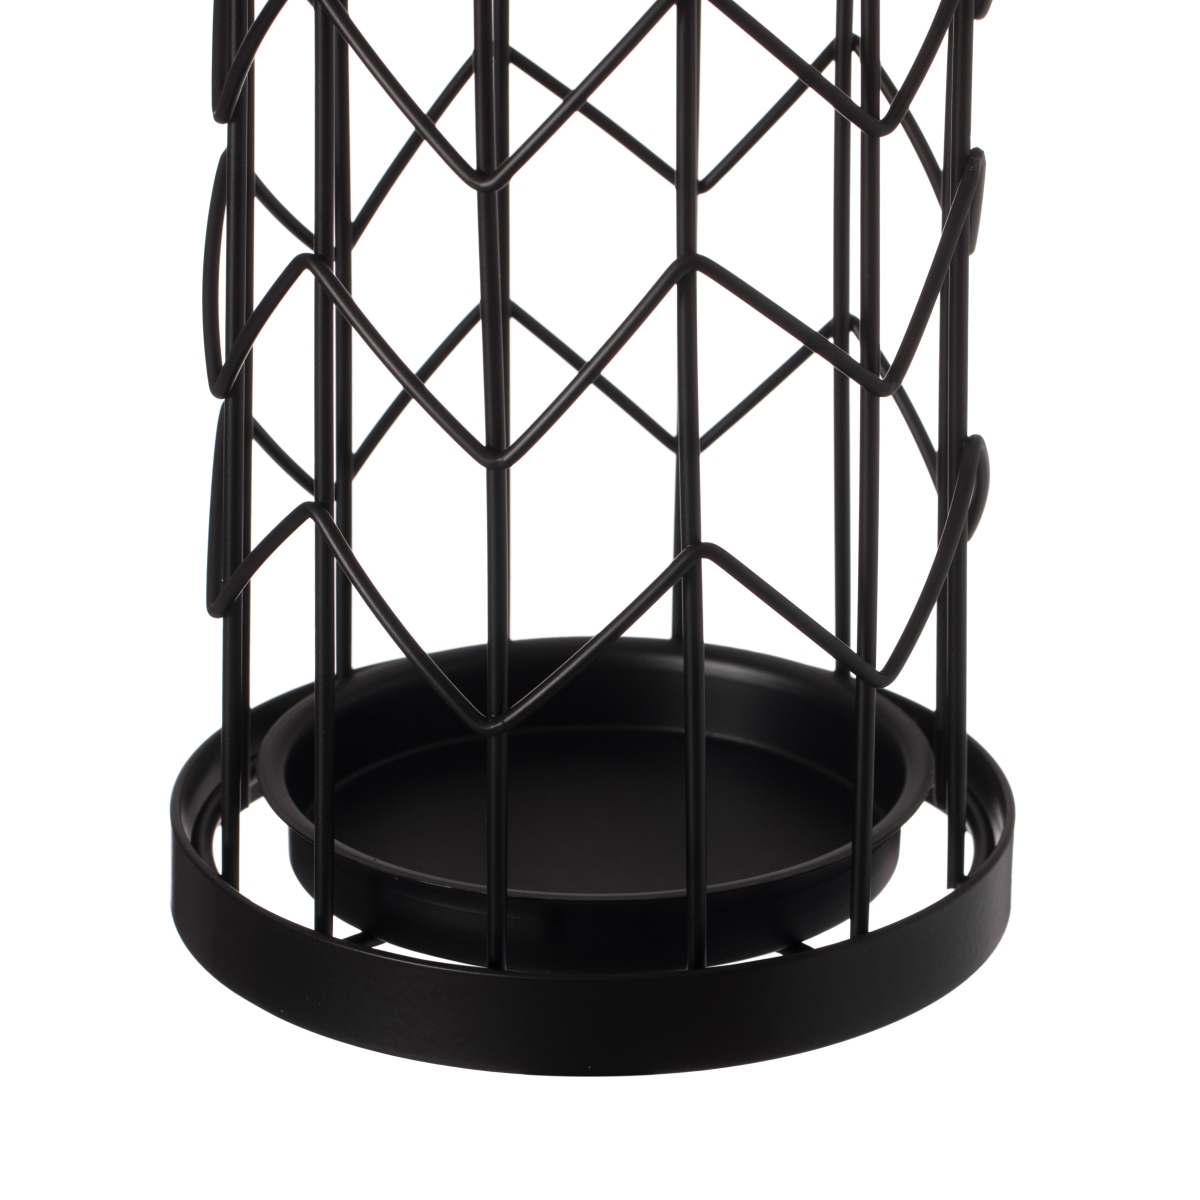 Picture of Vintiquewise QI004469 Black Round Horizontal Design Umbrella Holder Stand for Indoor and Outdoor with Drip Water Tray